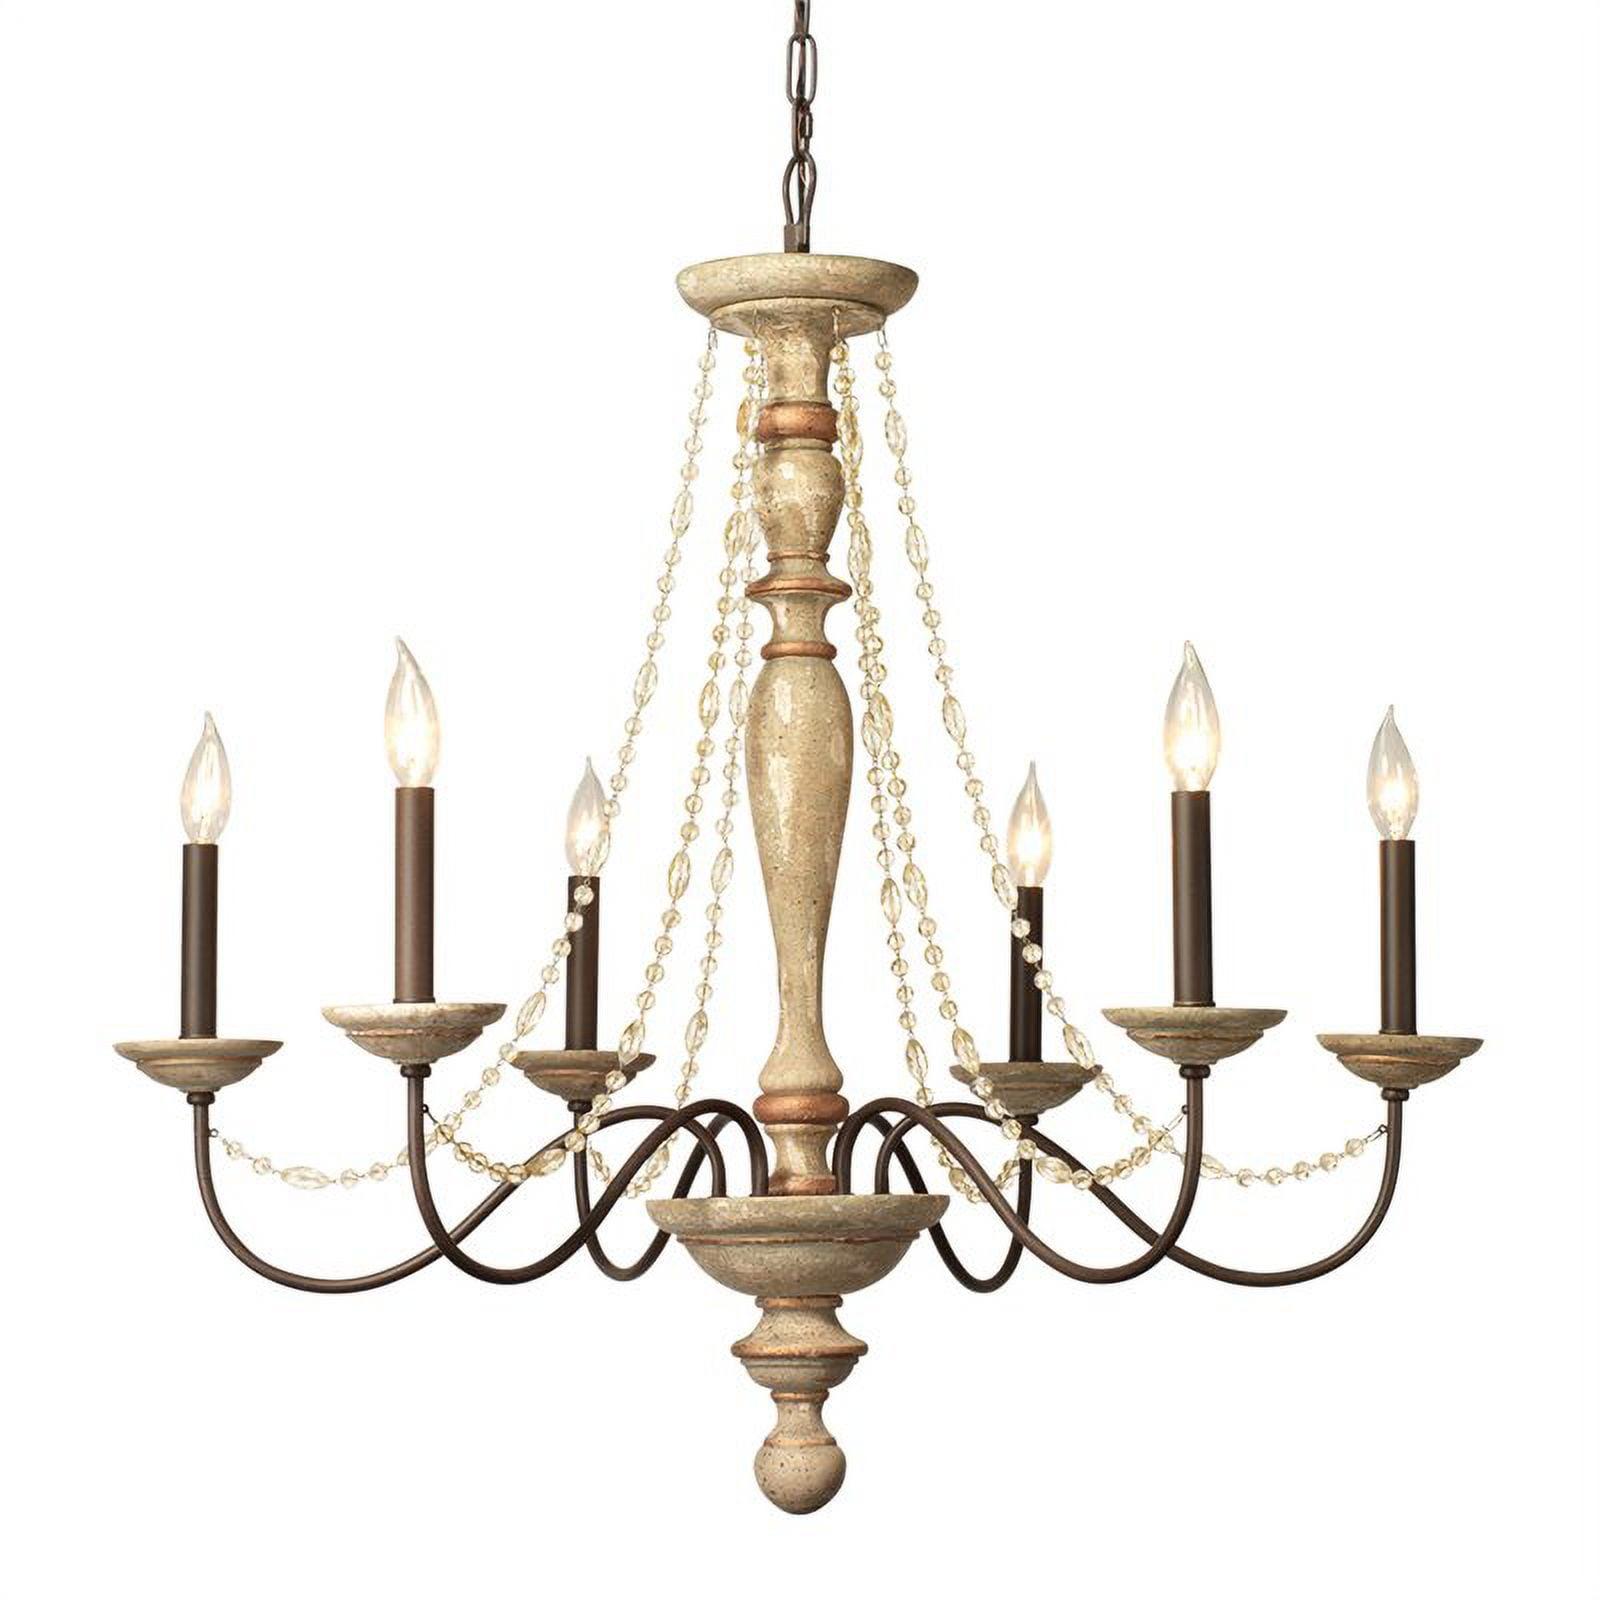 Eden Home Transitional Wood Glamourous and Elegant Chandelier in White